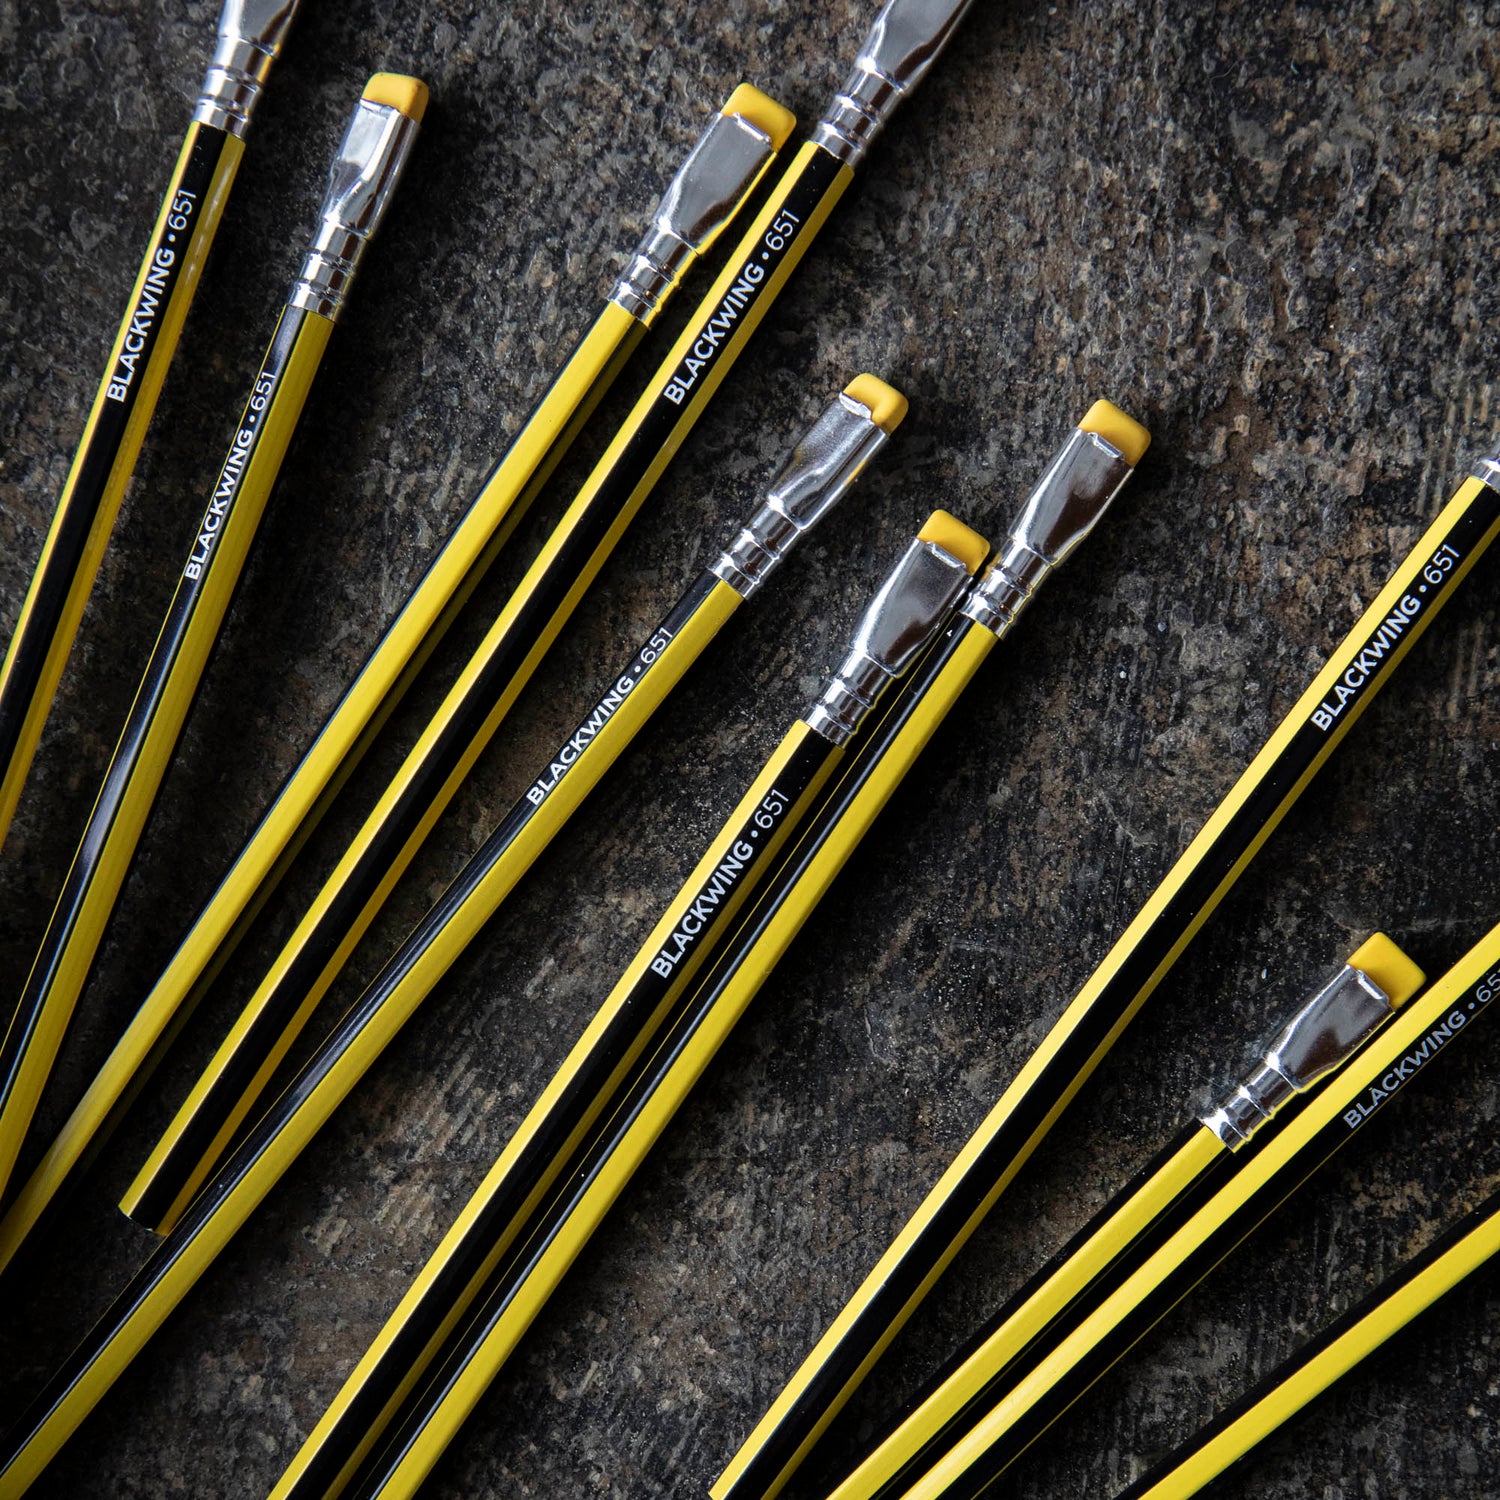 A collection of Blackwing Volume 651- Tribute to Bruce Lee pencils, one sharpened, arranged diagonally on a dark background, reminiscent of Bruce Lee&